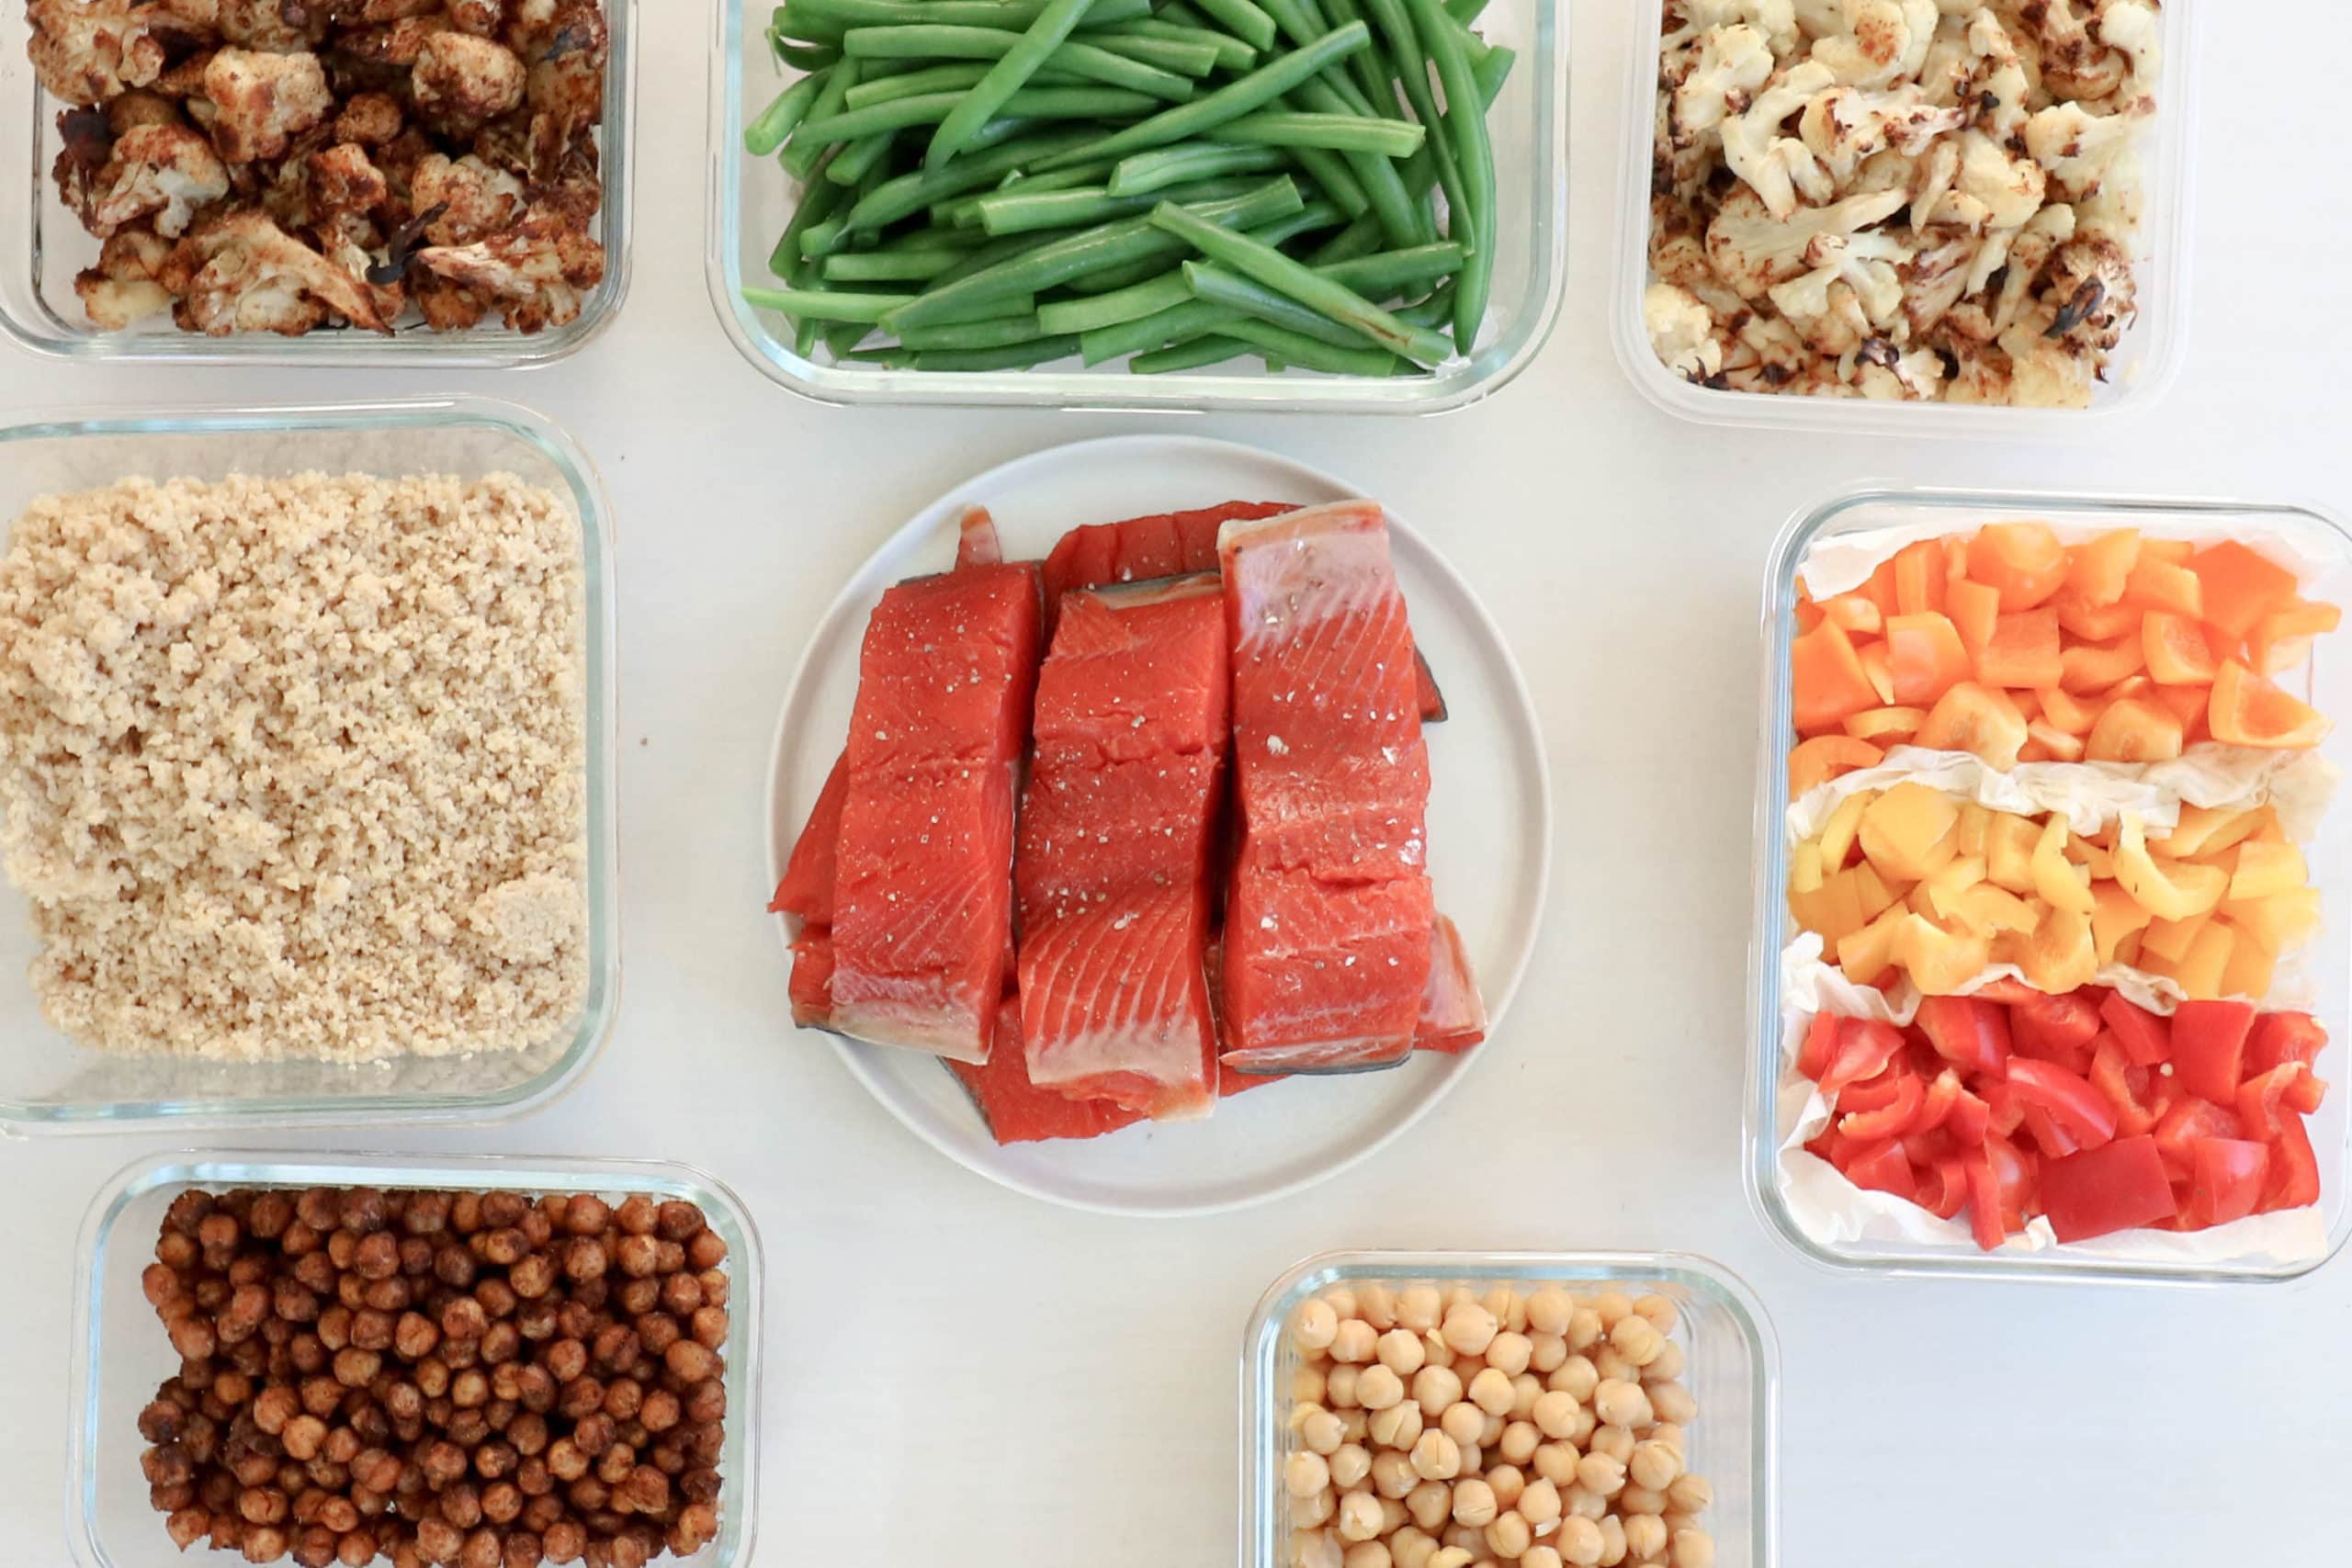 How to Meal Prep — A Beginner's Guide